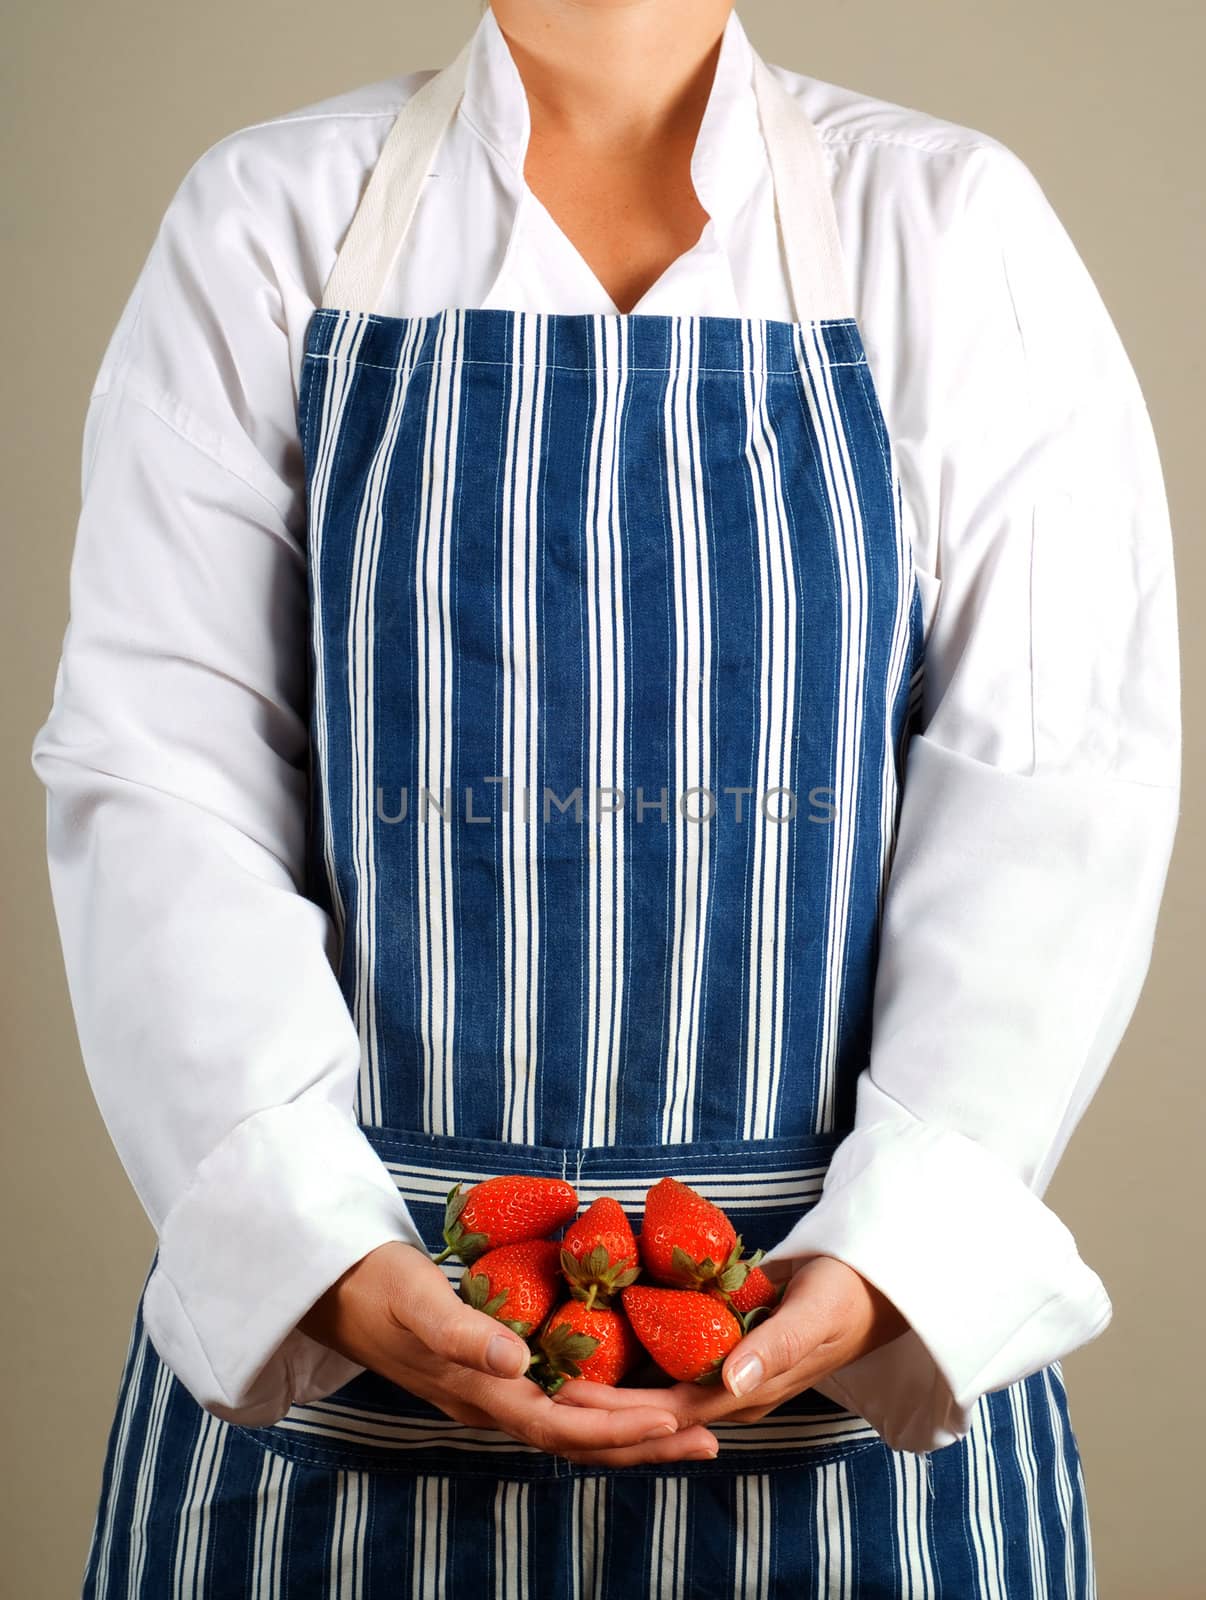 Woman cook or chef holding strawberries in her hands